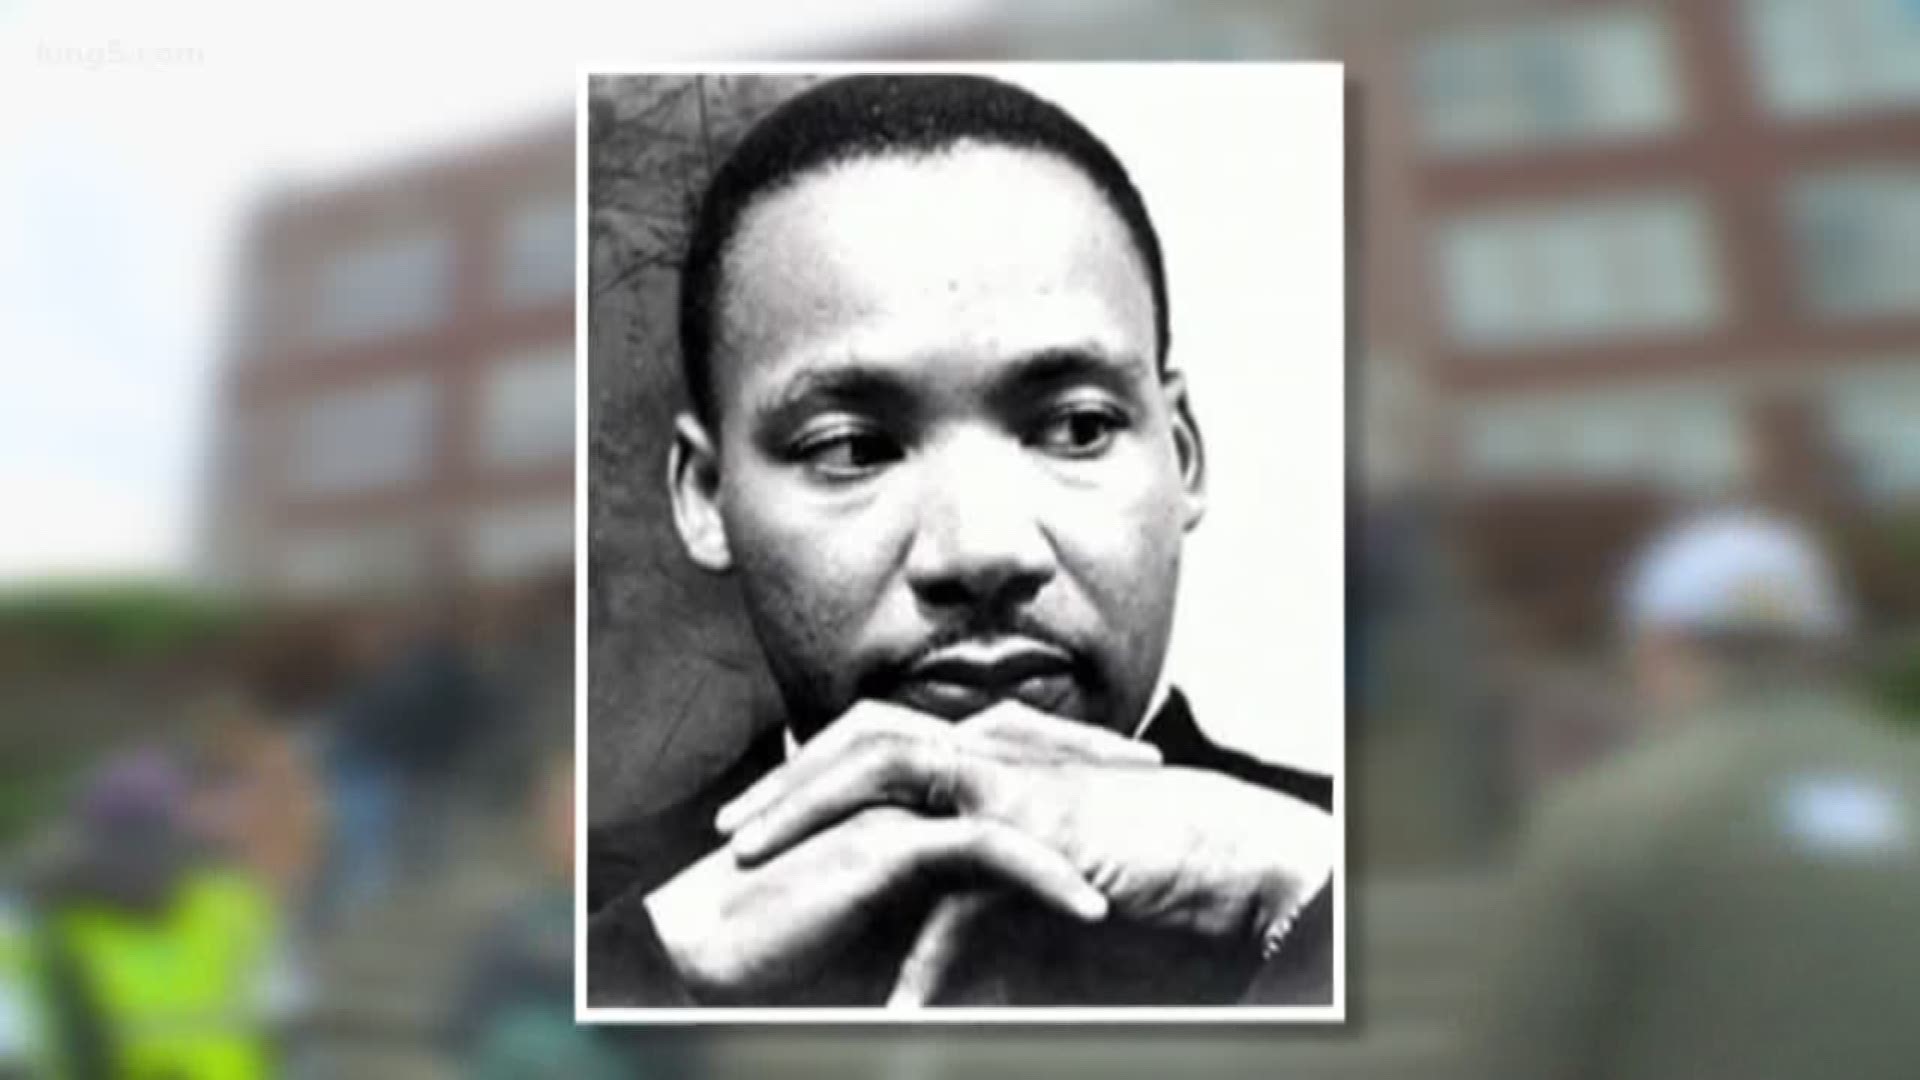 KING 5's Ted Land revisits one of the locations Martin Luther King went to speak in 1961.